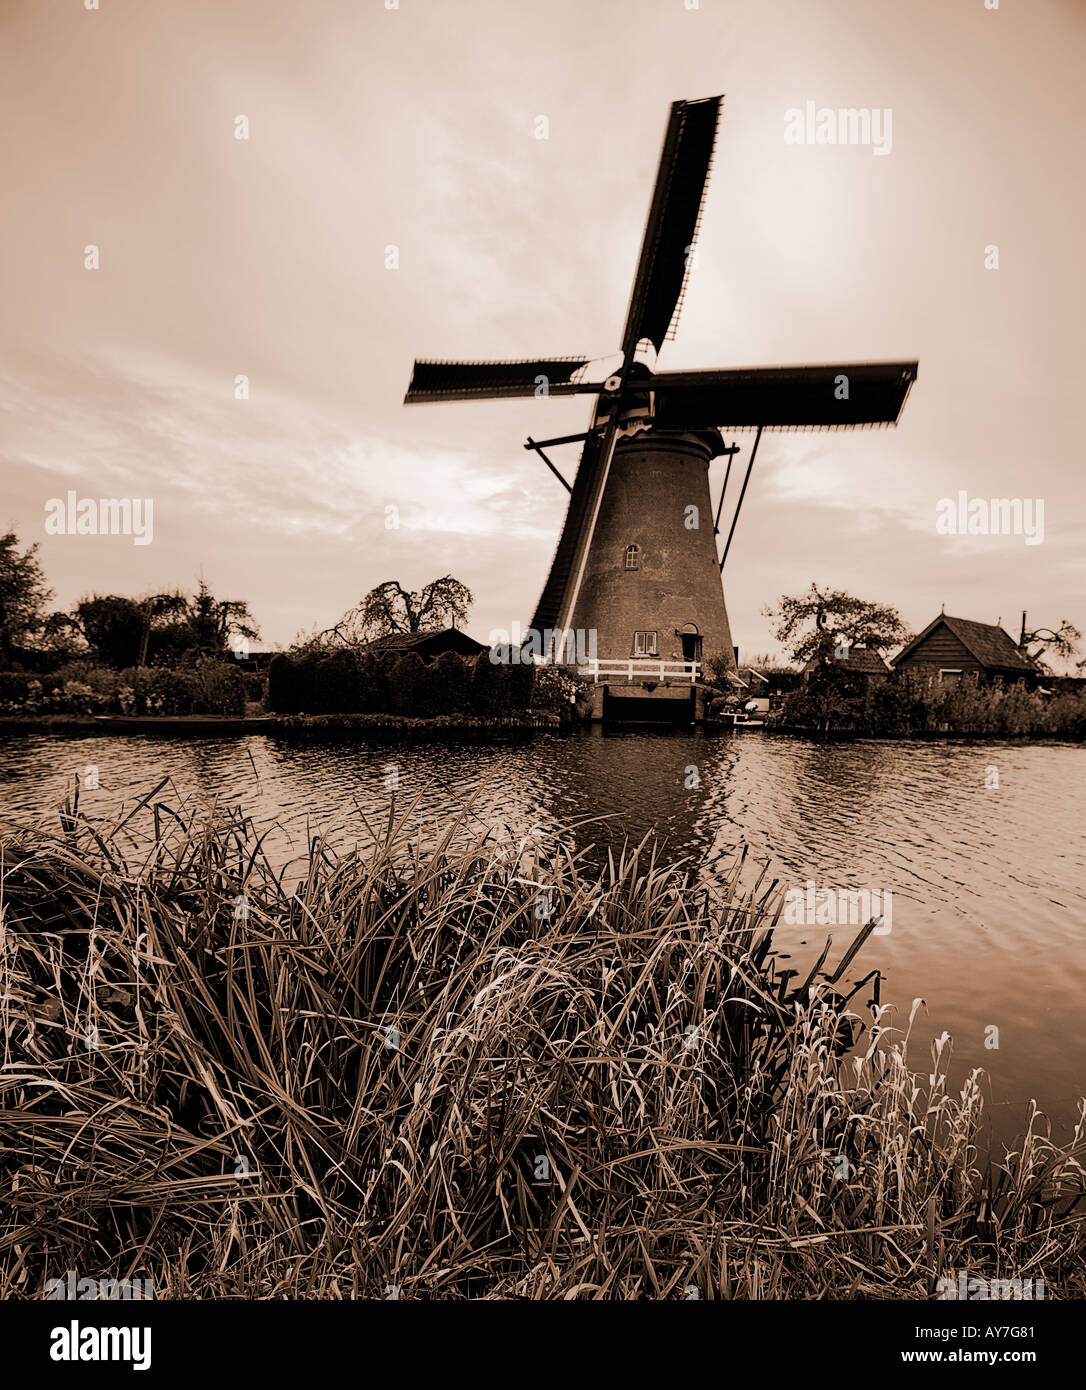 Windmill at Kinderdijk Holland Netherlands Europe with a Lith print effect Stock Photo